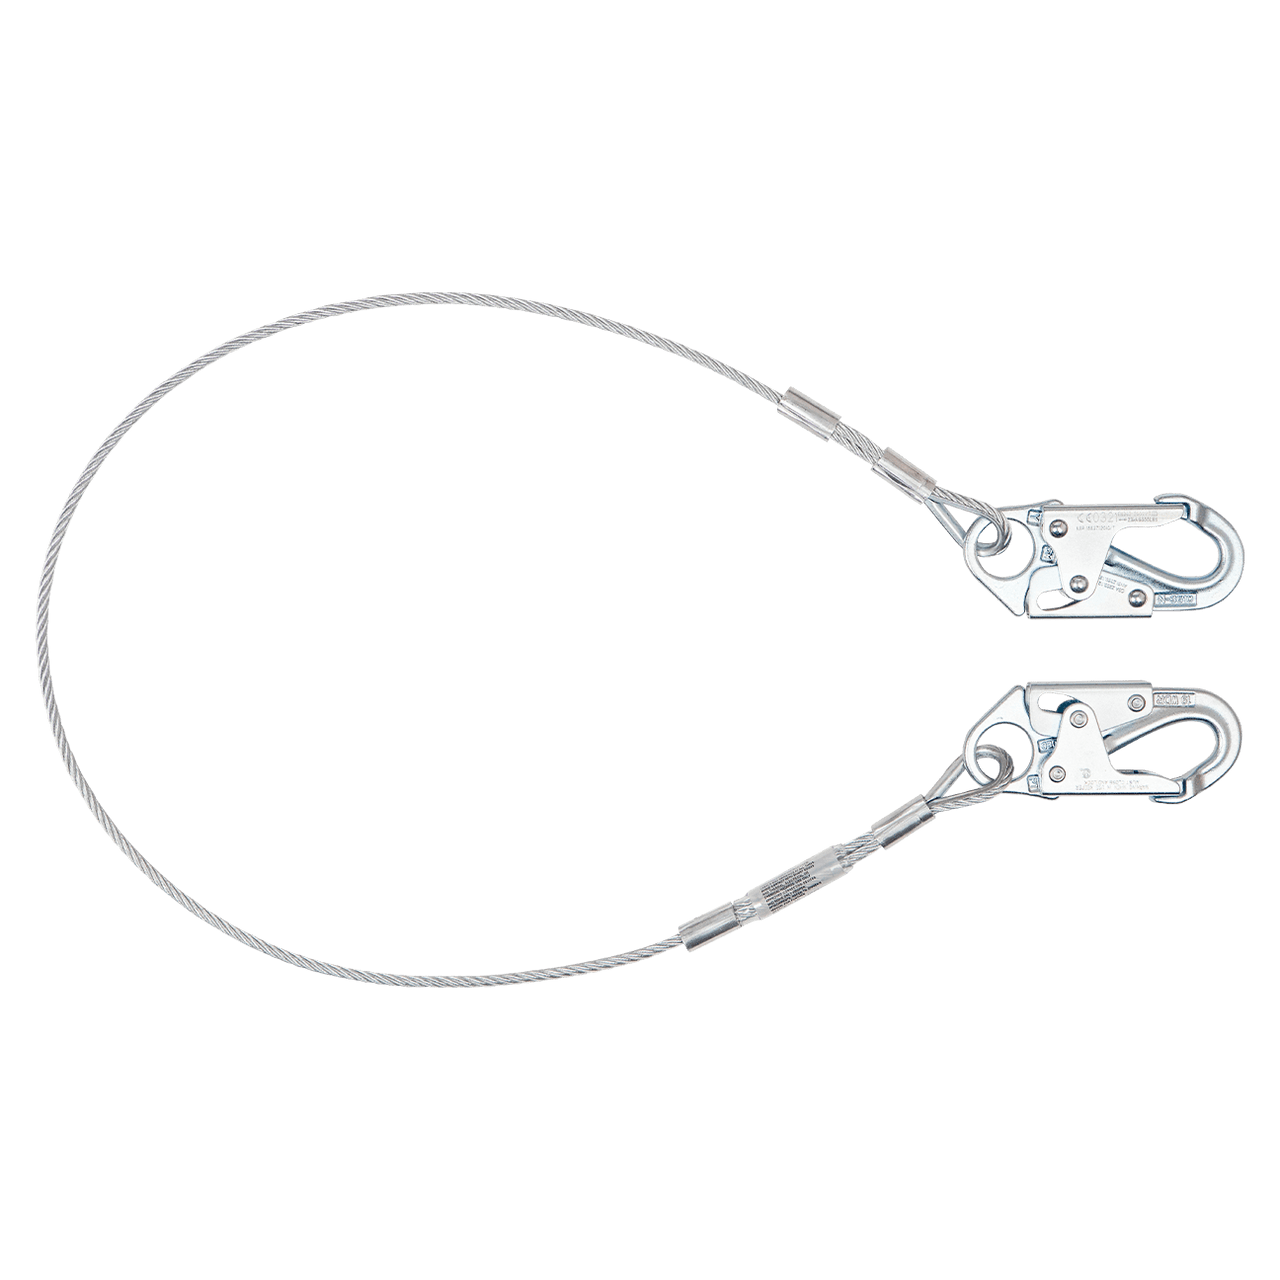 FallTech Fixed-Length Cable Restraint Lanyard with Steel Snap Hooks from GME Supply